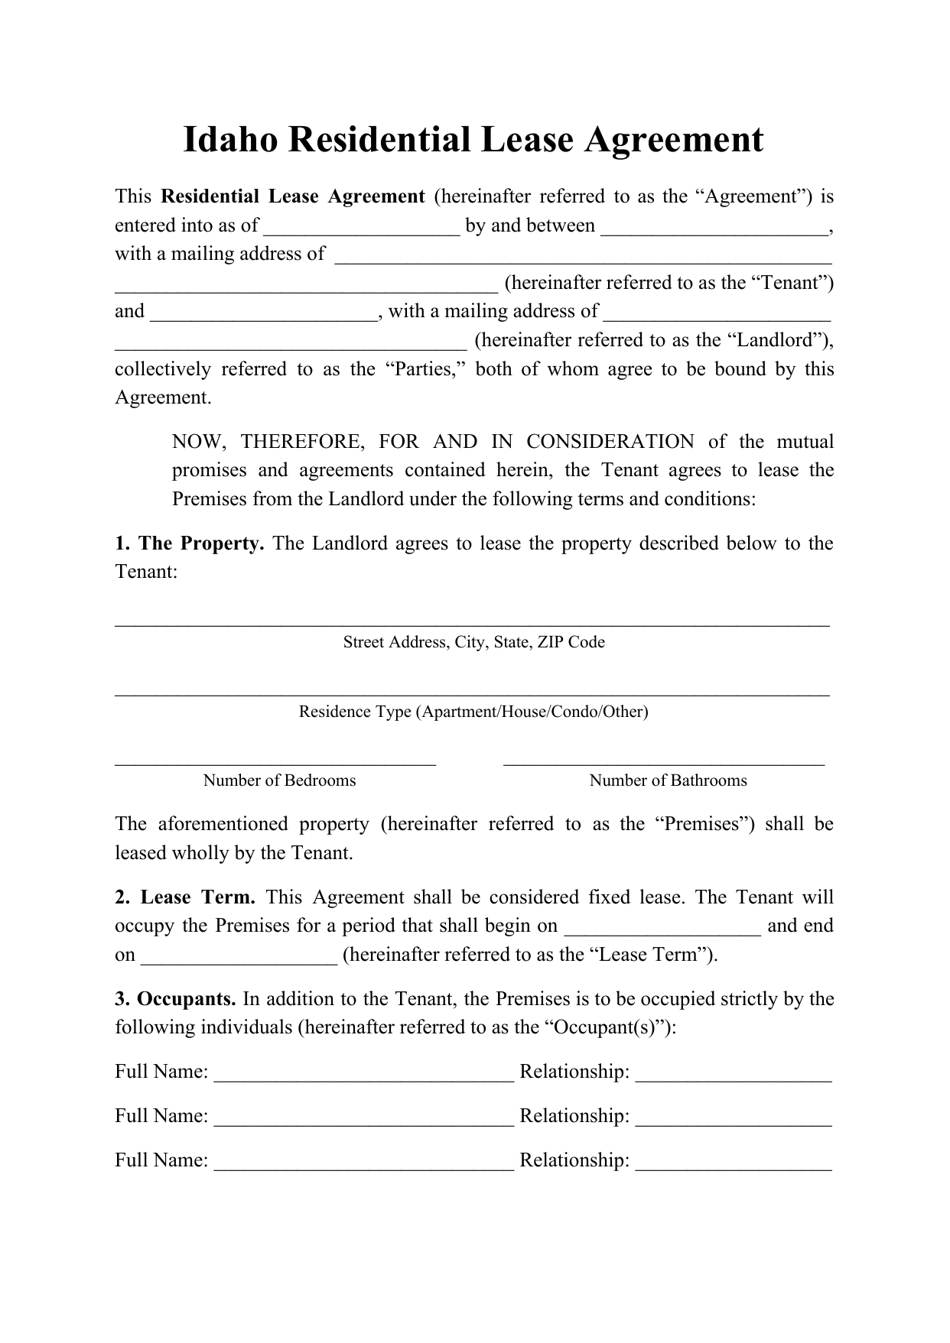 new-jersey-residential-lease-agreement-form-fill-out-and-sign